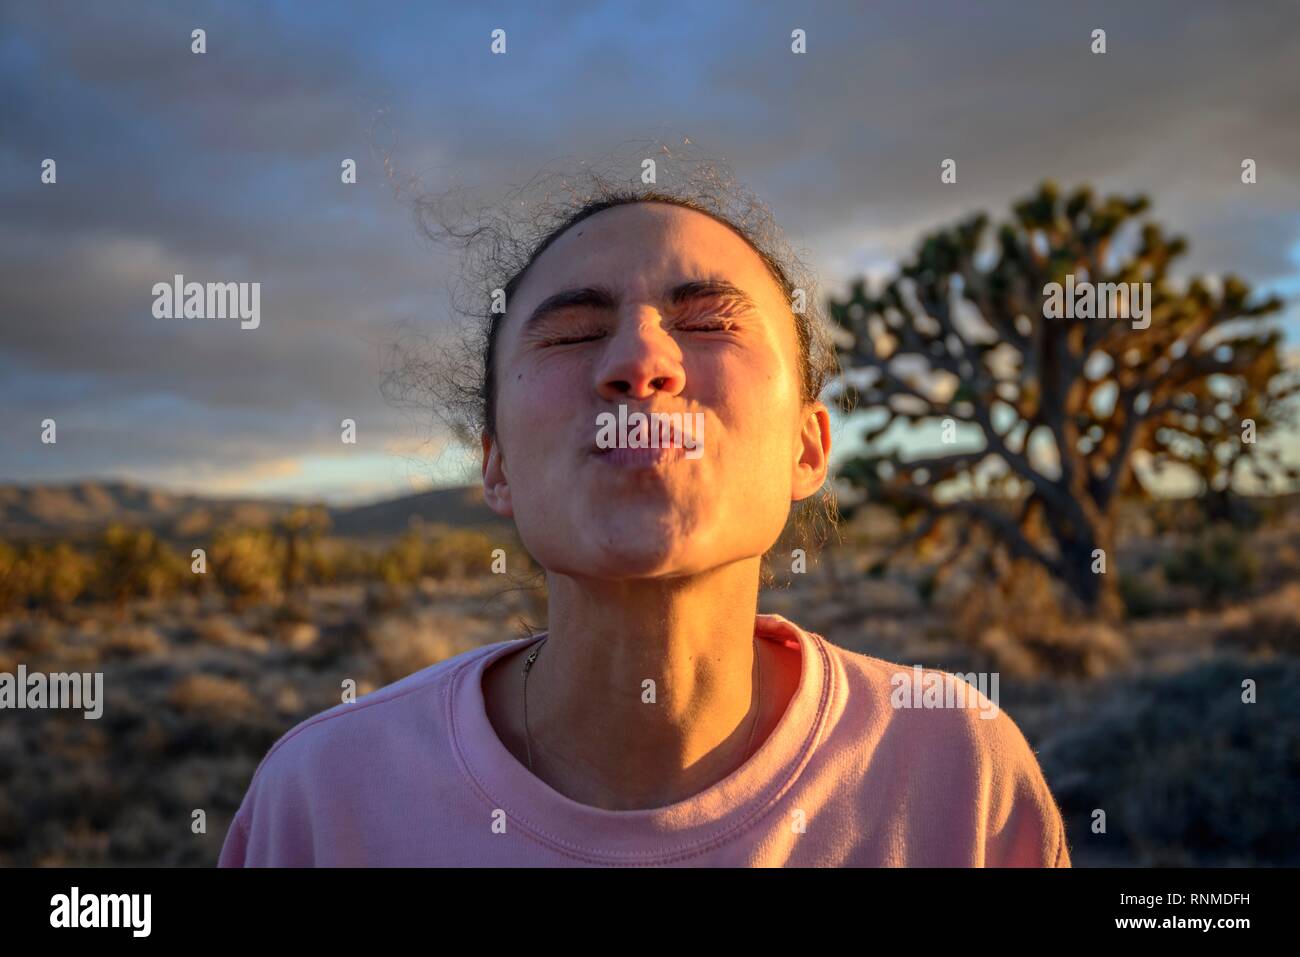 In love young pretty woman with kissing mouth, evening light, Mojave desert, desert landscape, Mojave National Preserve Stock Photo